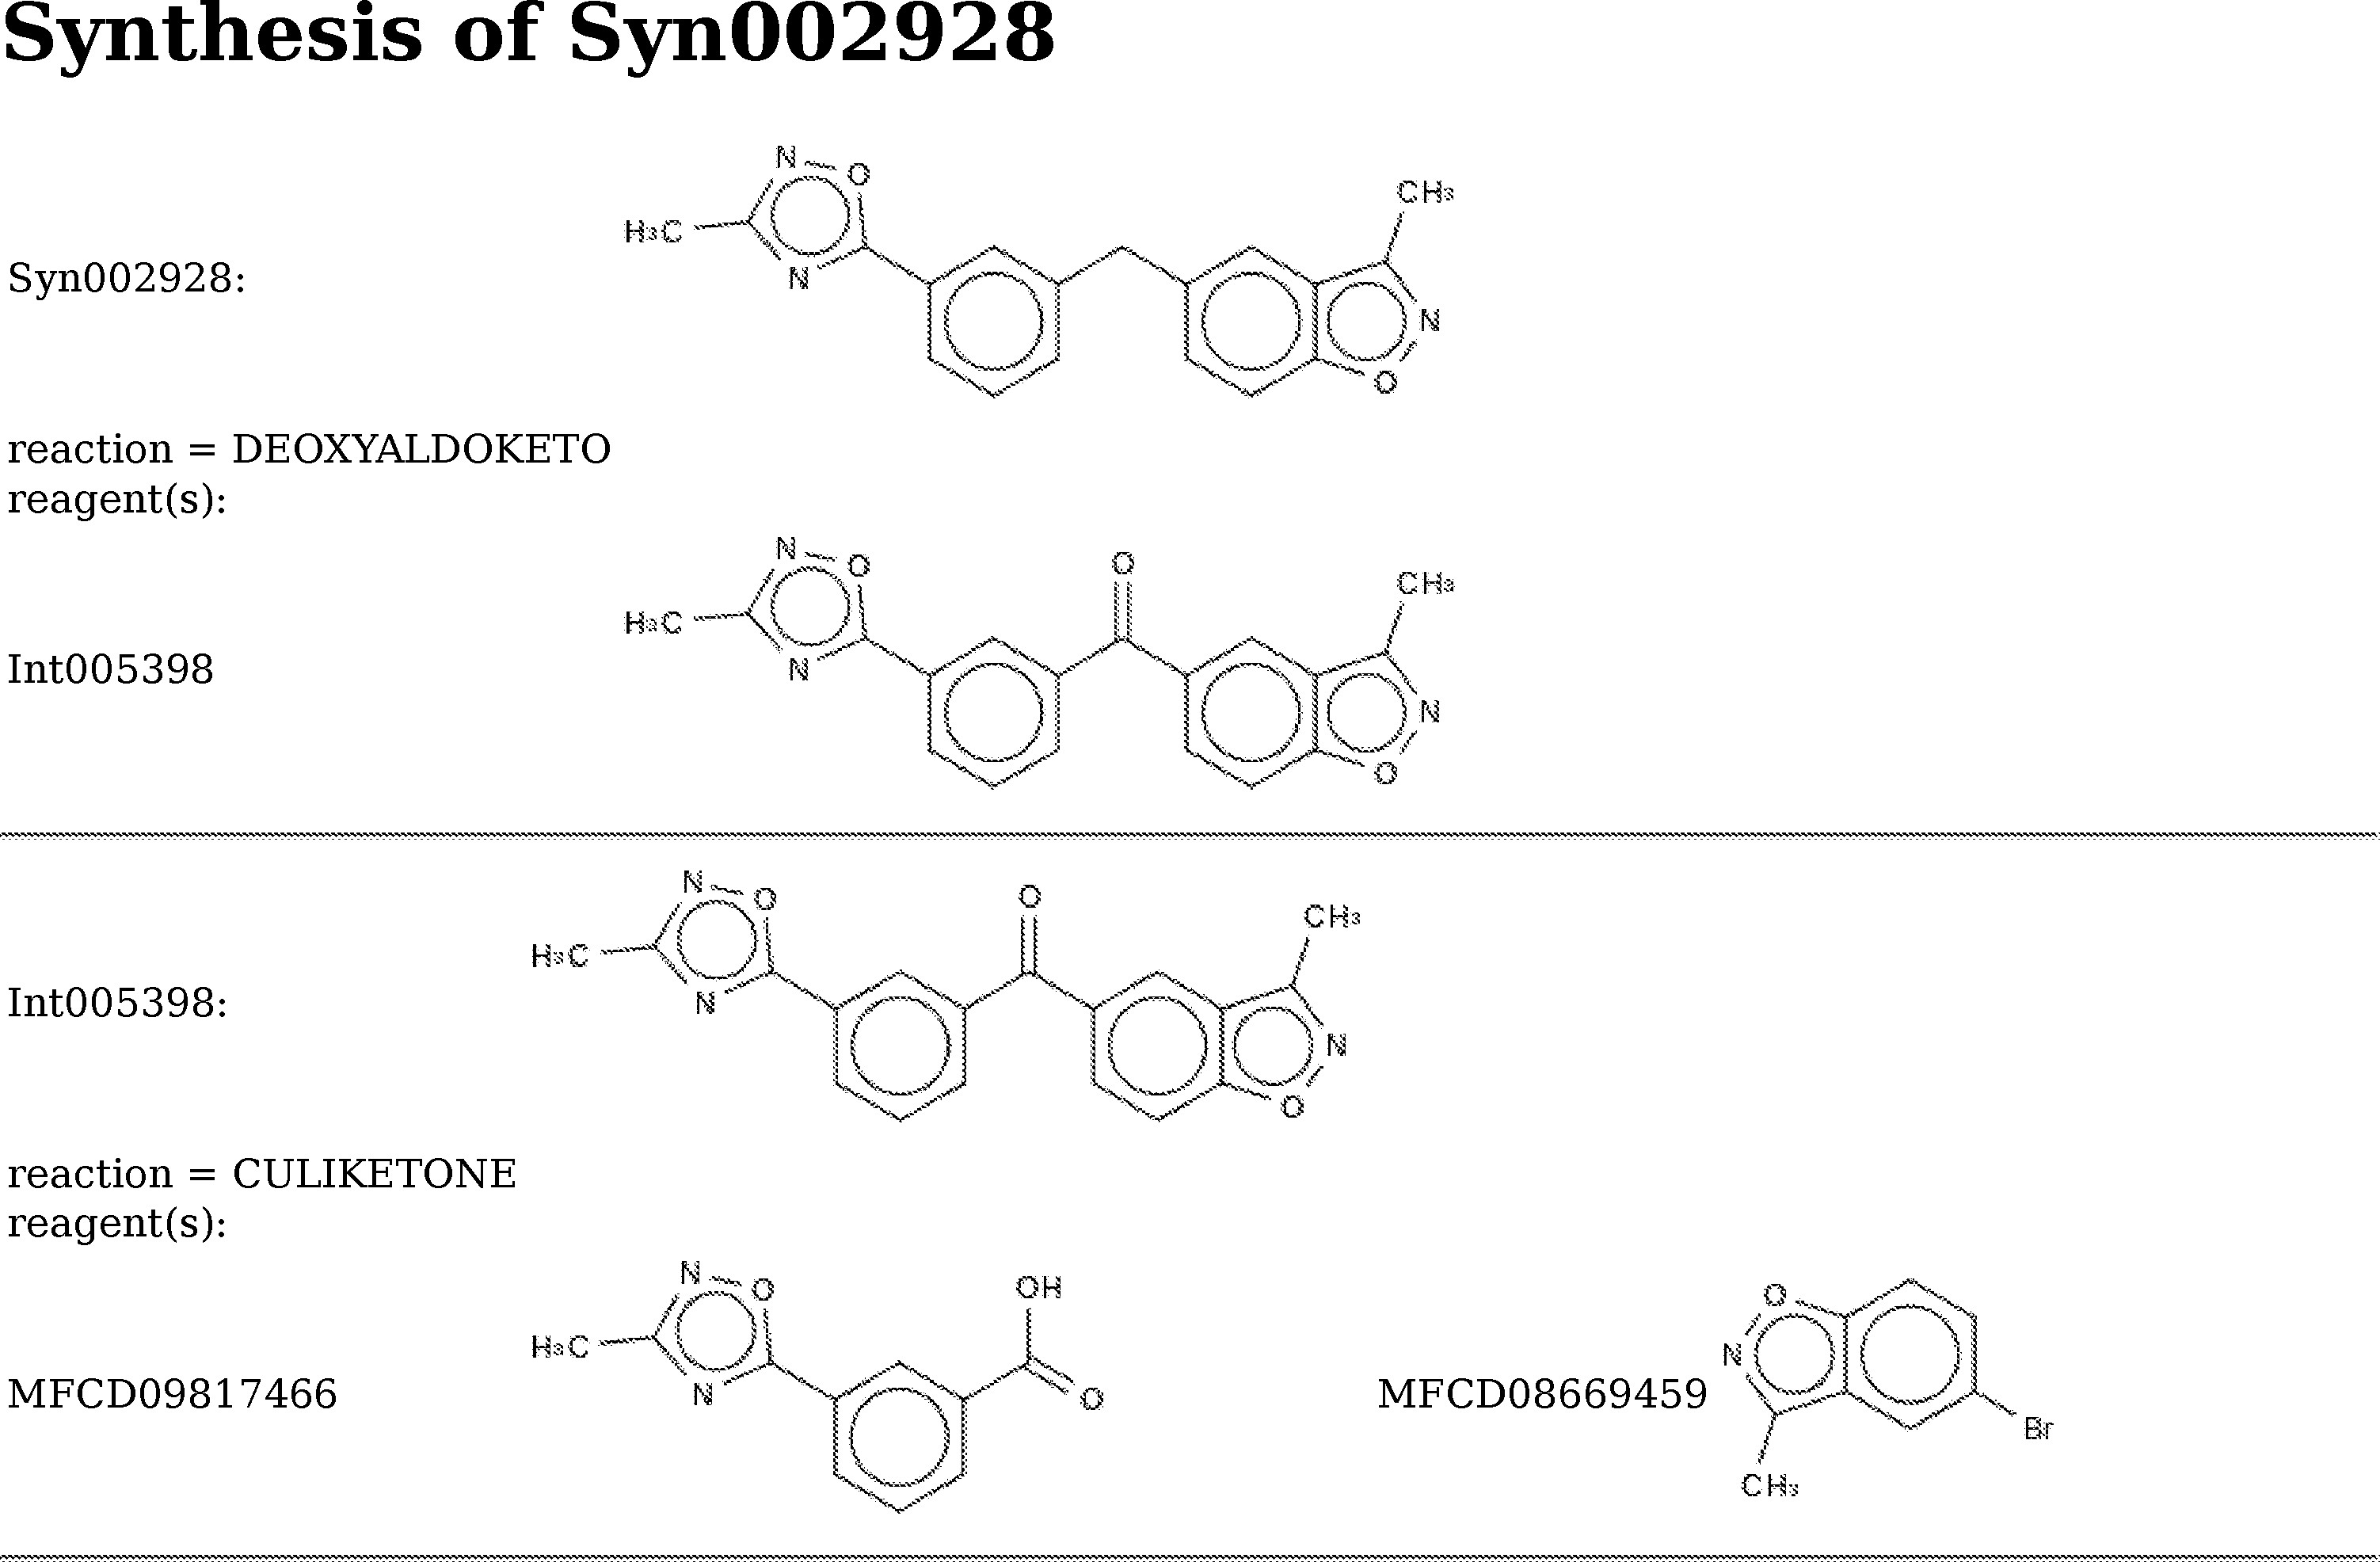 figure of Syn002928 synthesis, 2D